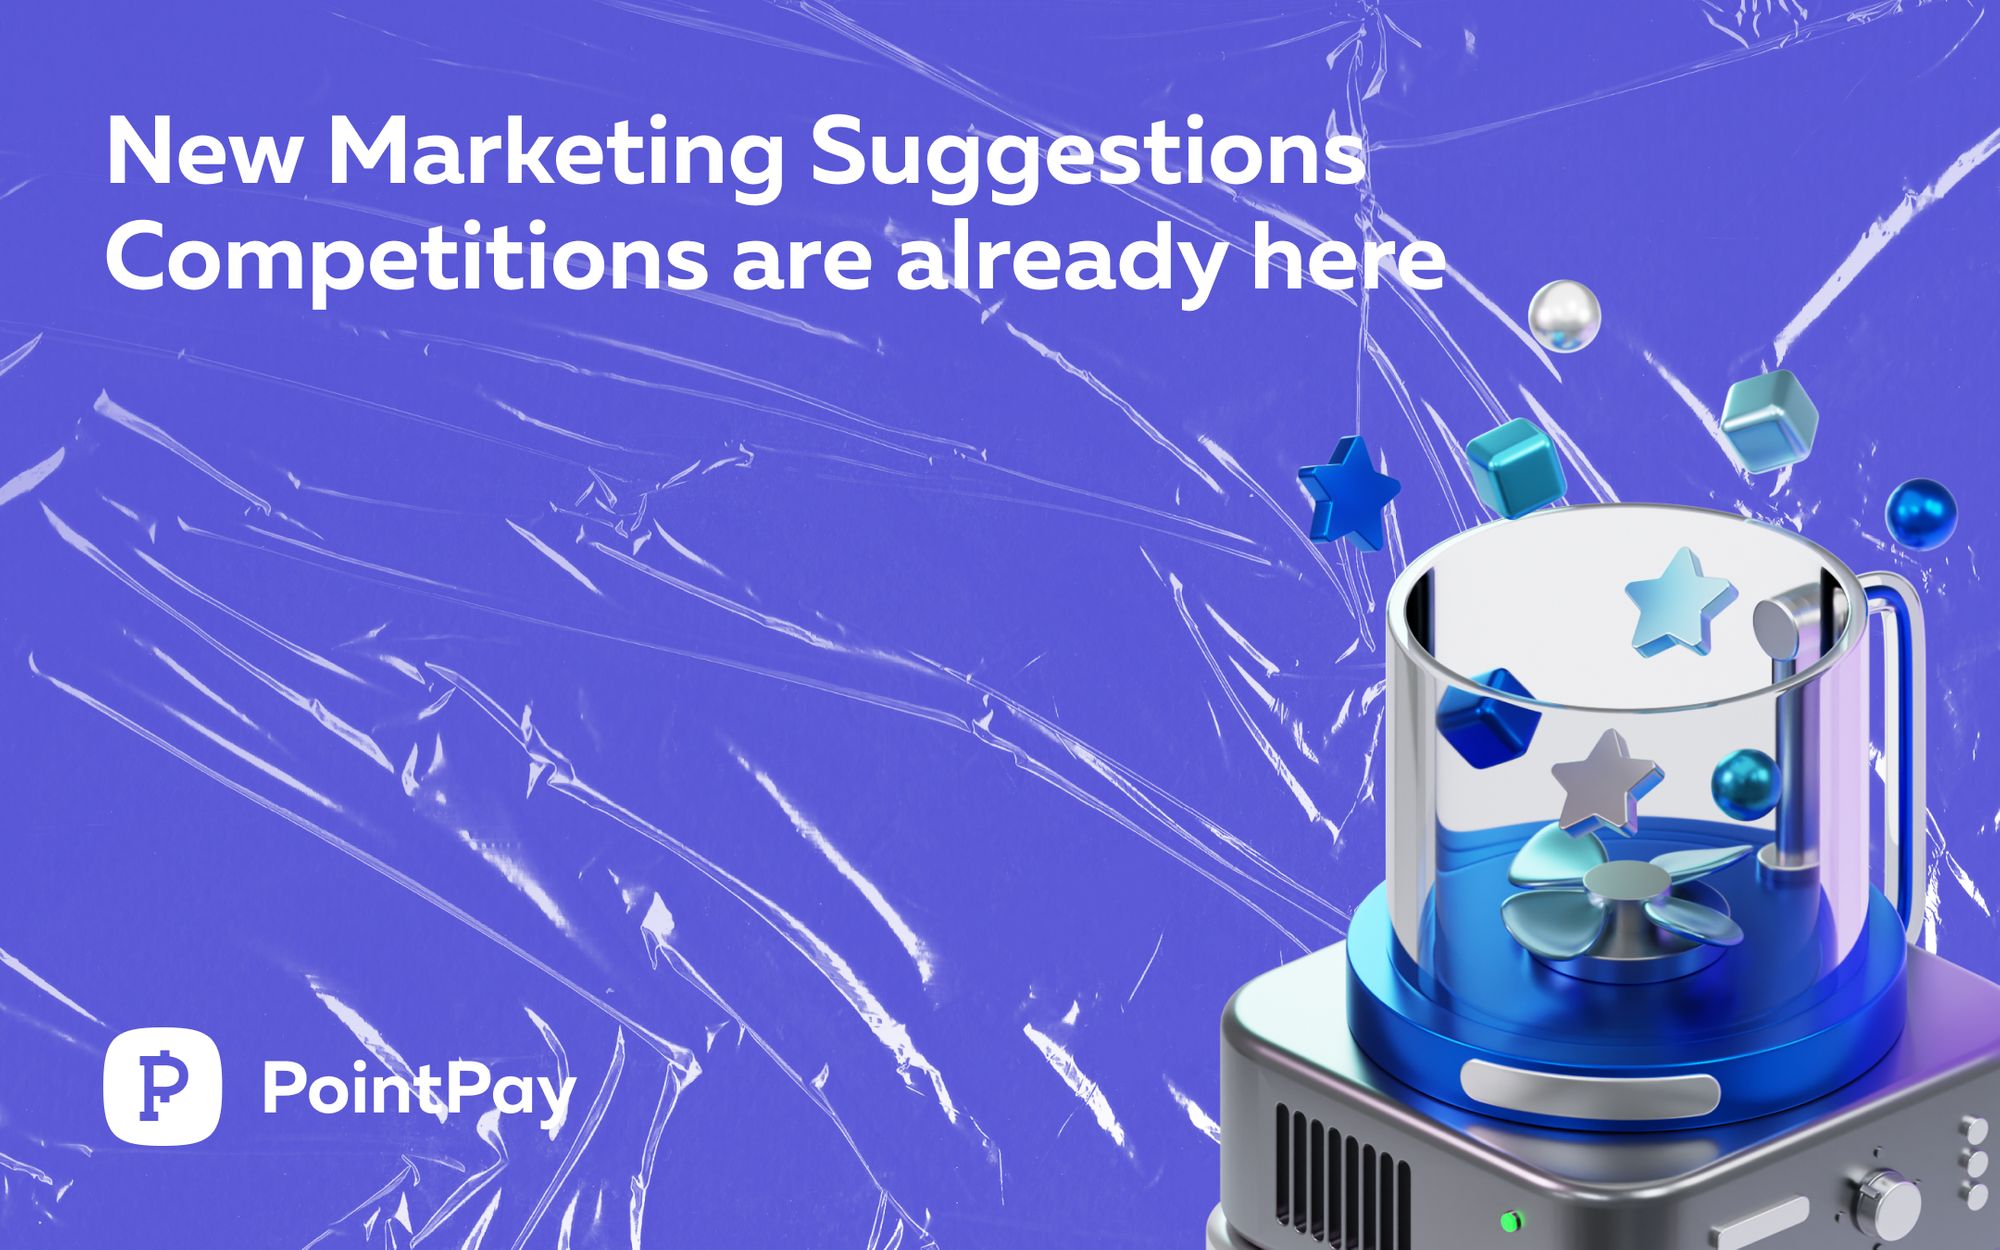 Announcement: PointPay Marketing Suggestions Competition!